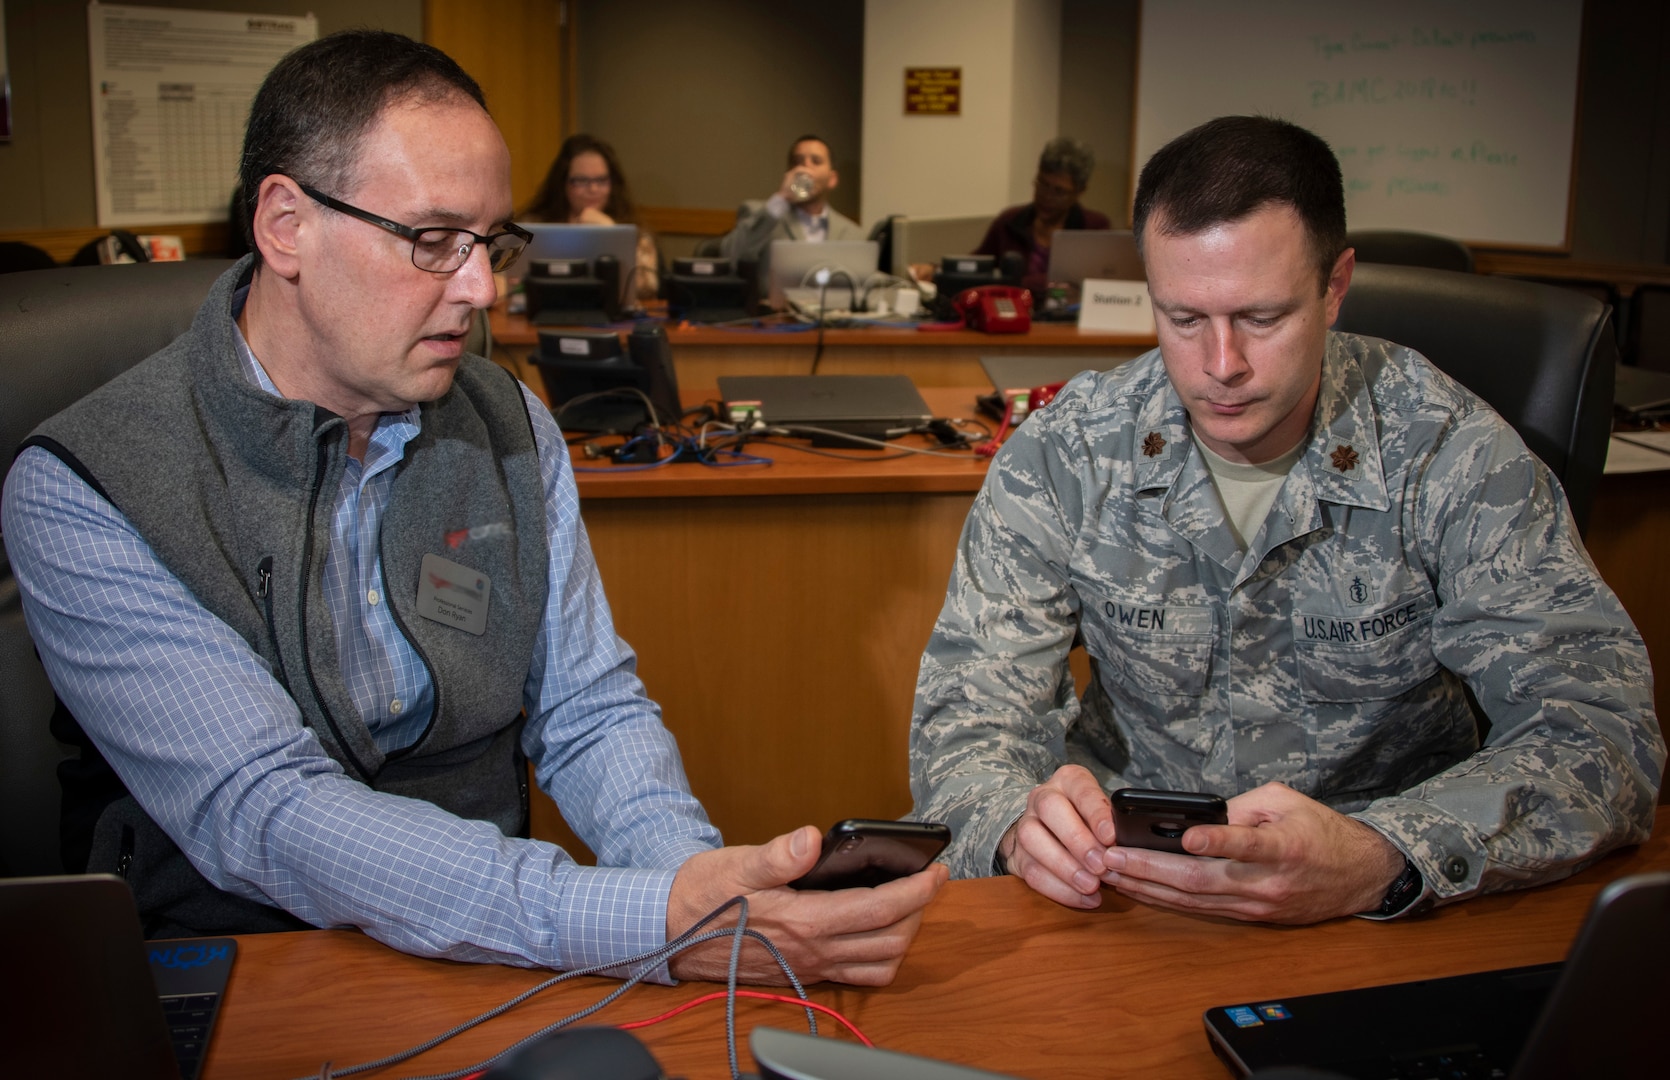 Don Ryan (left), a representative of the company that developed the app, teaches Maj. Samuel Owen (right), physician, how to use the secure messaging app at Brooke Army Medical Center at Joint Base San Antonio-Fort Sam Houston Dec. 4. The app, which is Health Insurance Portability and Accountability Act compliant, will allow BAMC staff members to share patient information and photos securely.